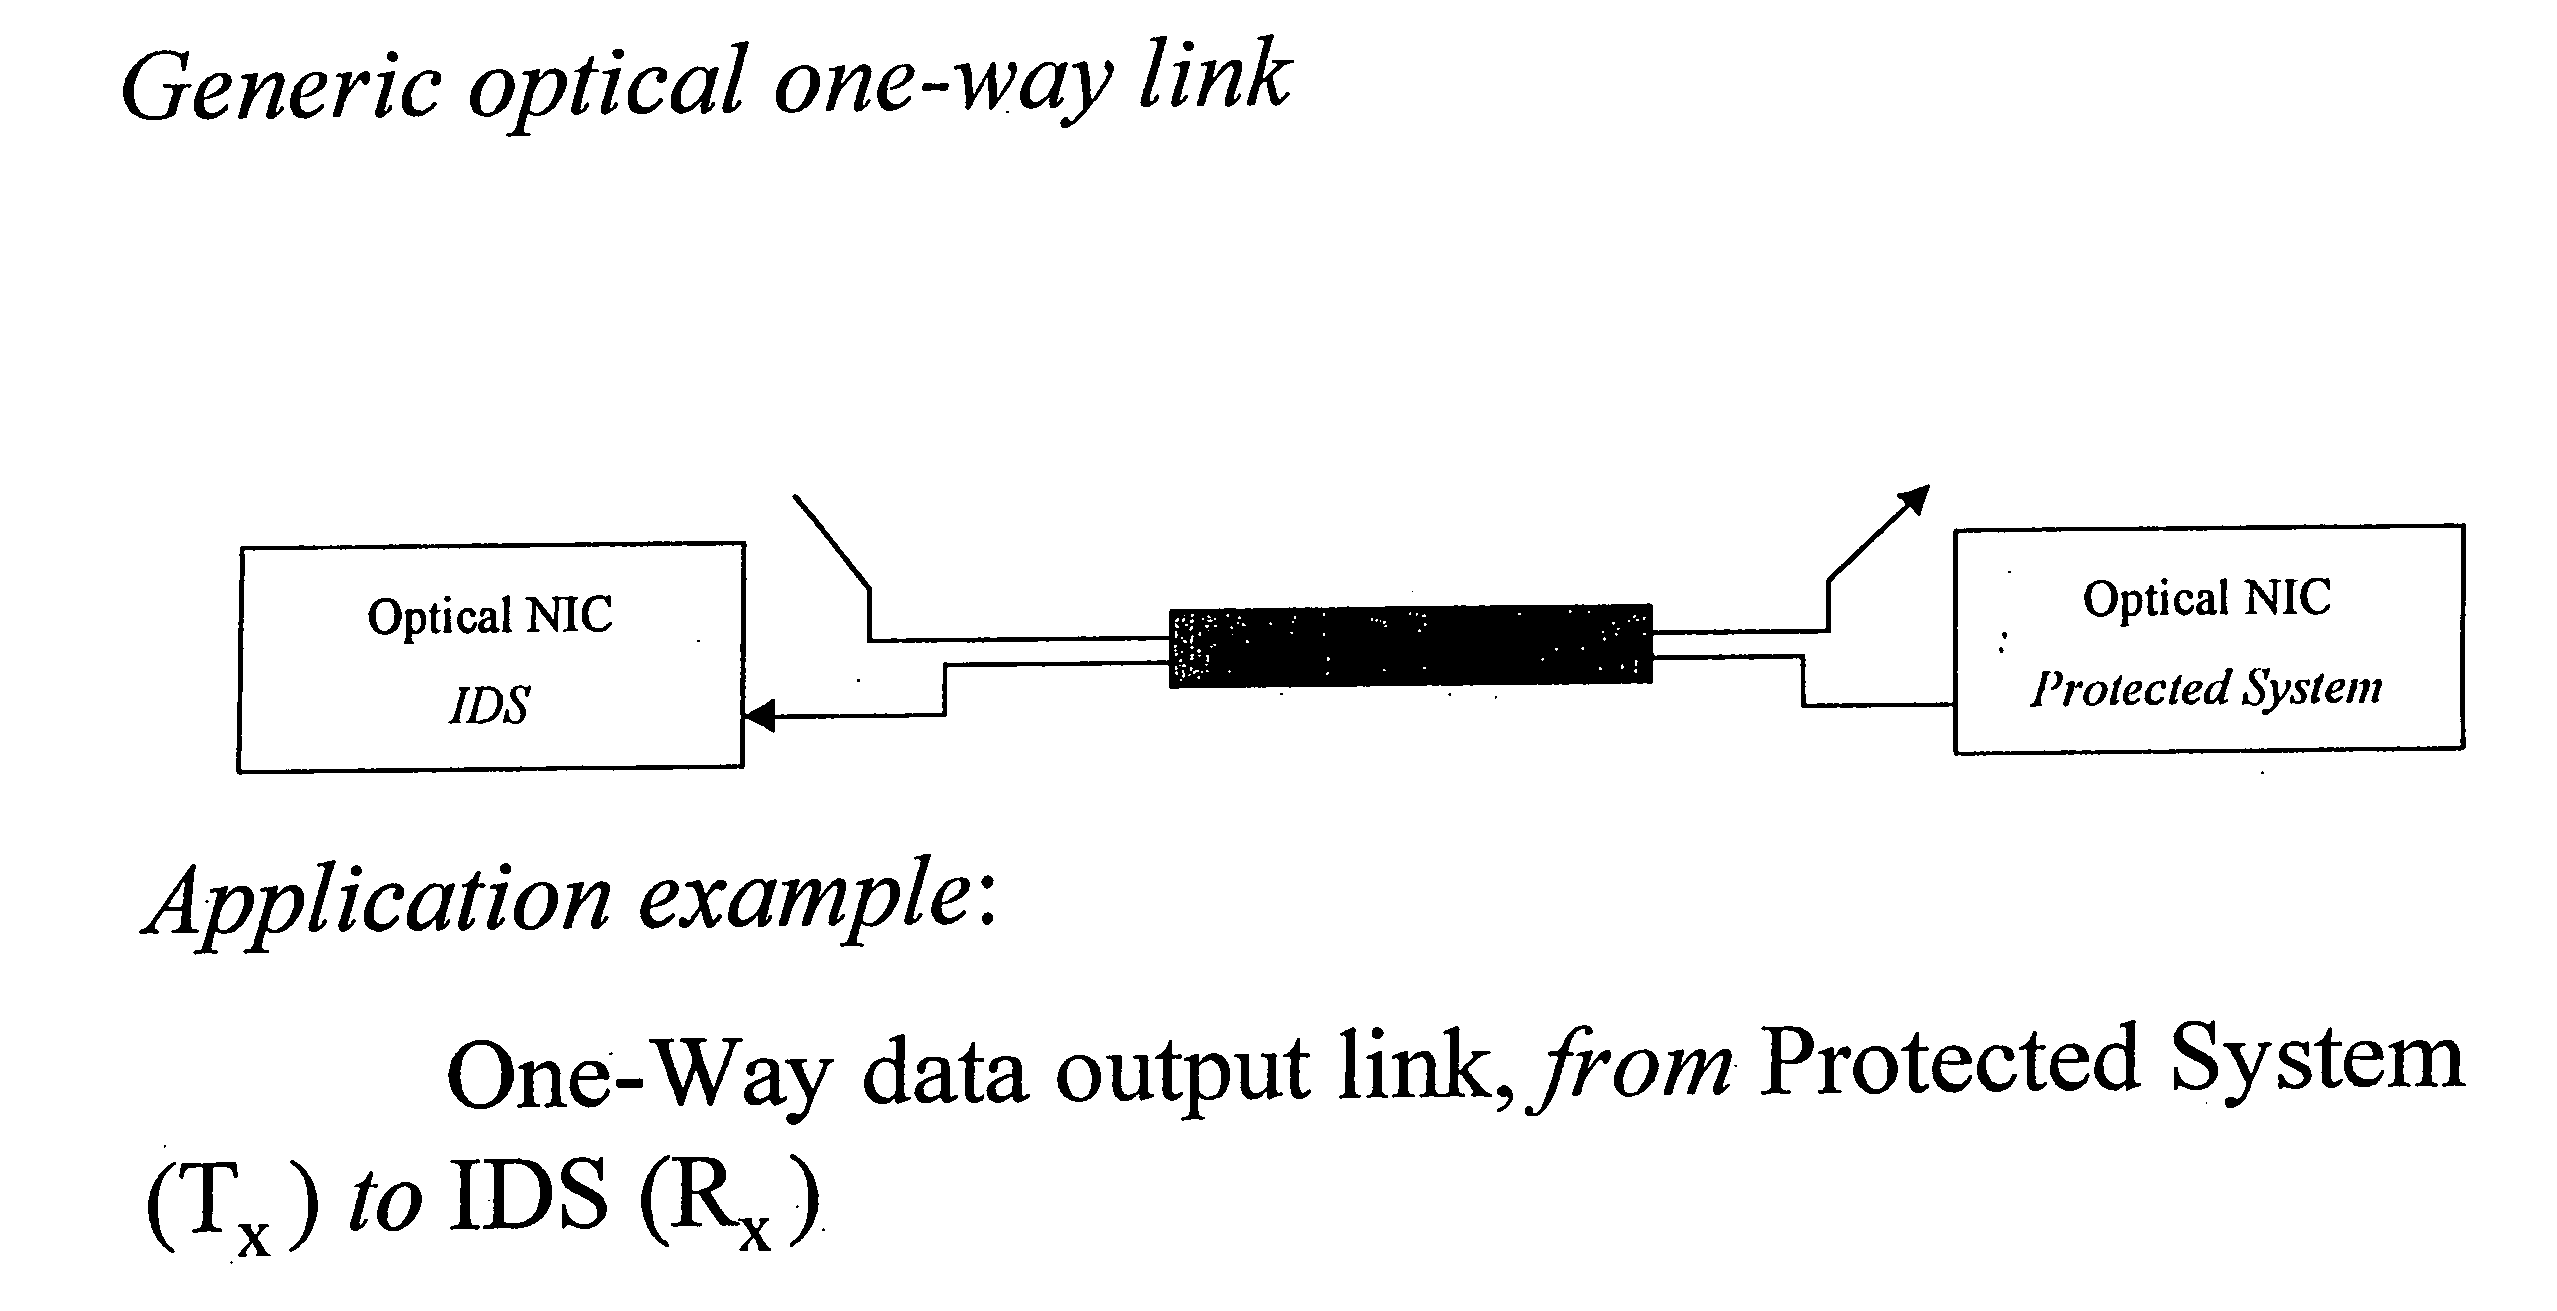 One-way data link for secure transfer of information